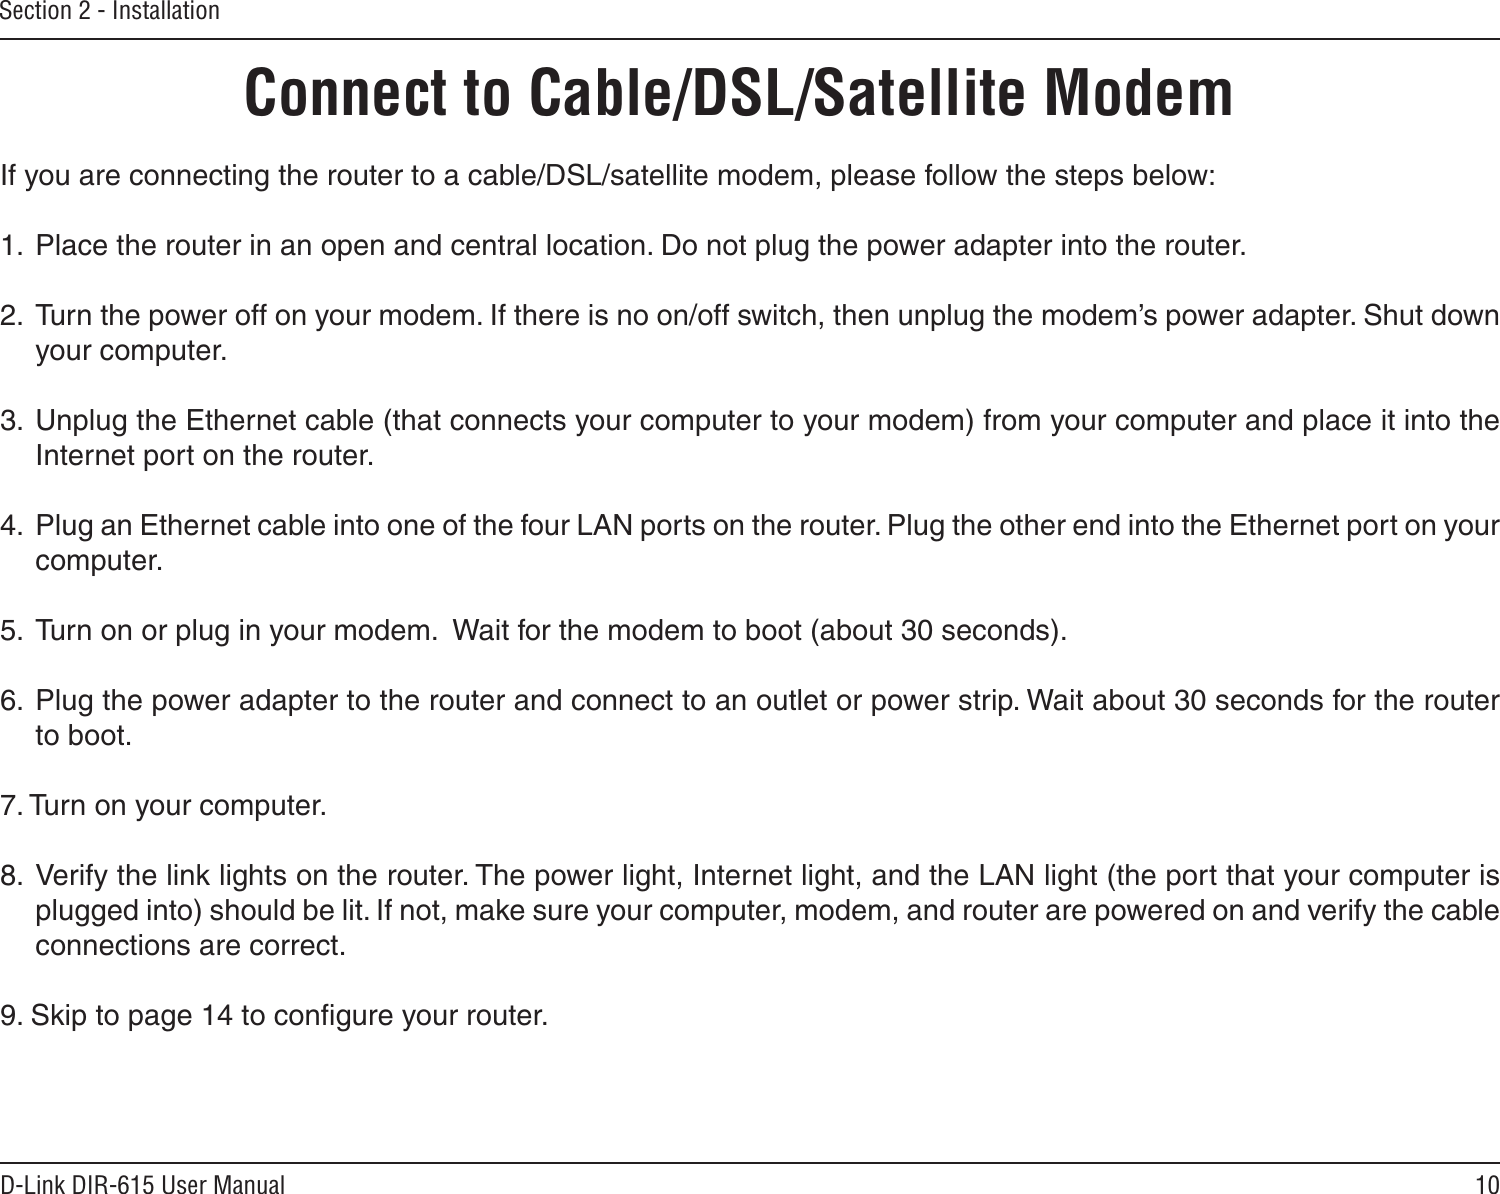 10D-Link DIR-615 User ManualSection 2 - InstallationIf you are connecting the router to a cable/DSL/satellite modem, please follow the steps below:1.  Place the router in an open and central location. Do not plug the power adapter into the router. 2.  Turn the power off on your modem. If there is no on/off switch, then unplug the modem’s power adapter. Shut down your computer.3.  Unplug the Ethernet cable (that connects your computer to your modem) from your computer and place it into the Internet port on the router.  4.  Plug an Ethernet cable into one of the four LAN ports on the router. Plug the other end into the Ethernet port on your computer.5.  Turn on or plug in your modem.  Wait for the modem to boot (about 30 seconds). 6.  Plug the power adapter to the router and connect to an outlet or power strip. Wait about 30 seconds for the router to boot. 7. Turn on your computer. 8.  Verify the link lights on the router. The power light, Internet light, and the LAN light (the port that your computer is plugged into) should be lit. If not, make sure your computer, modem, and router are powered on and verify the cable connections are correct. 9. Skip to page 14 to conﬁgure your router. Connect to Cable/DSL/Satellite Modem